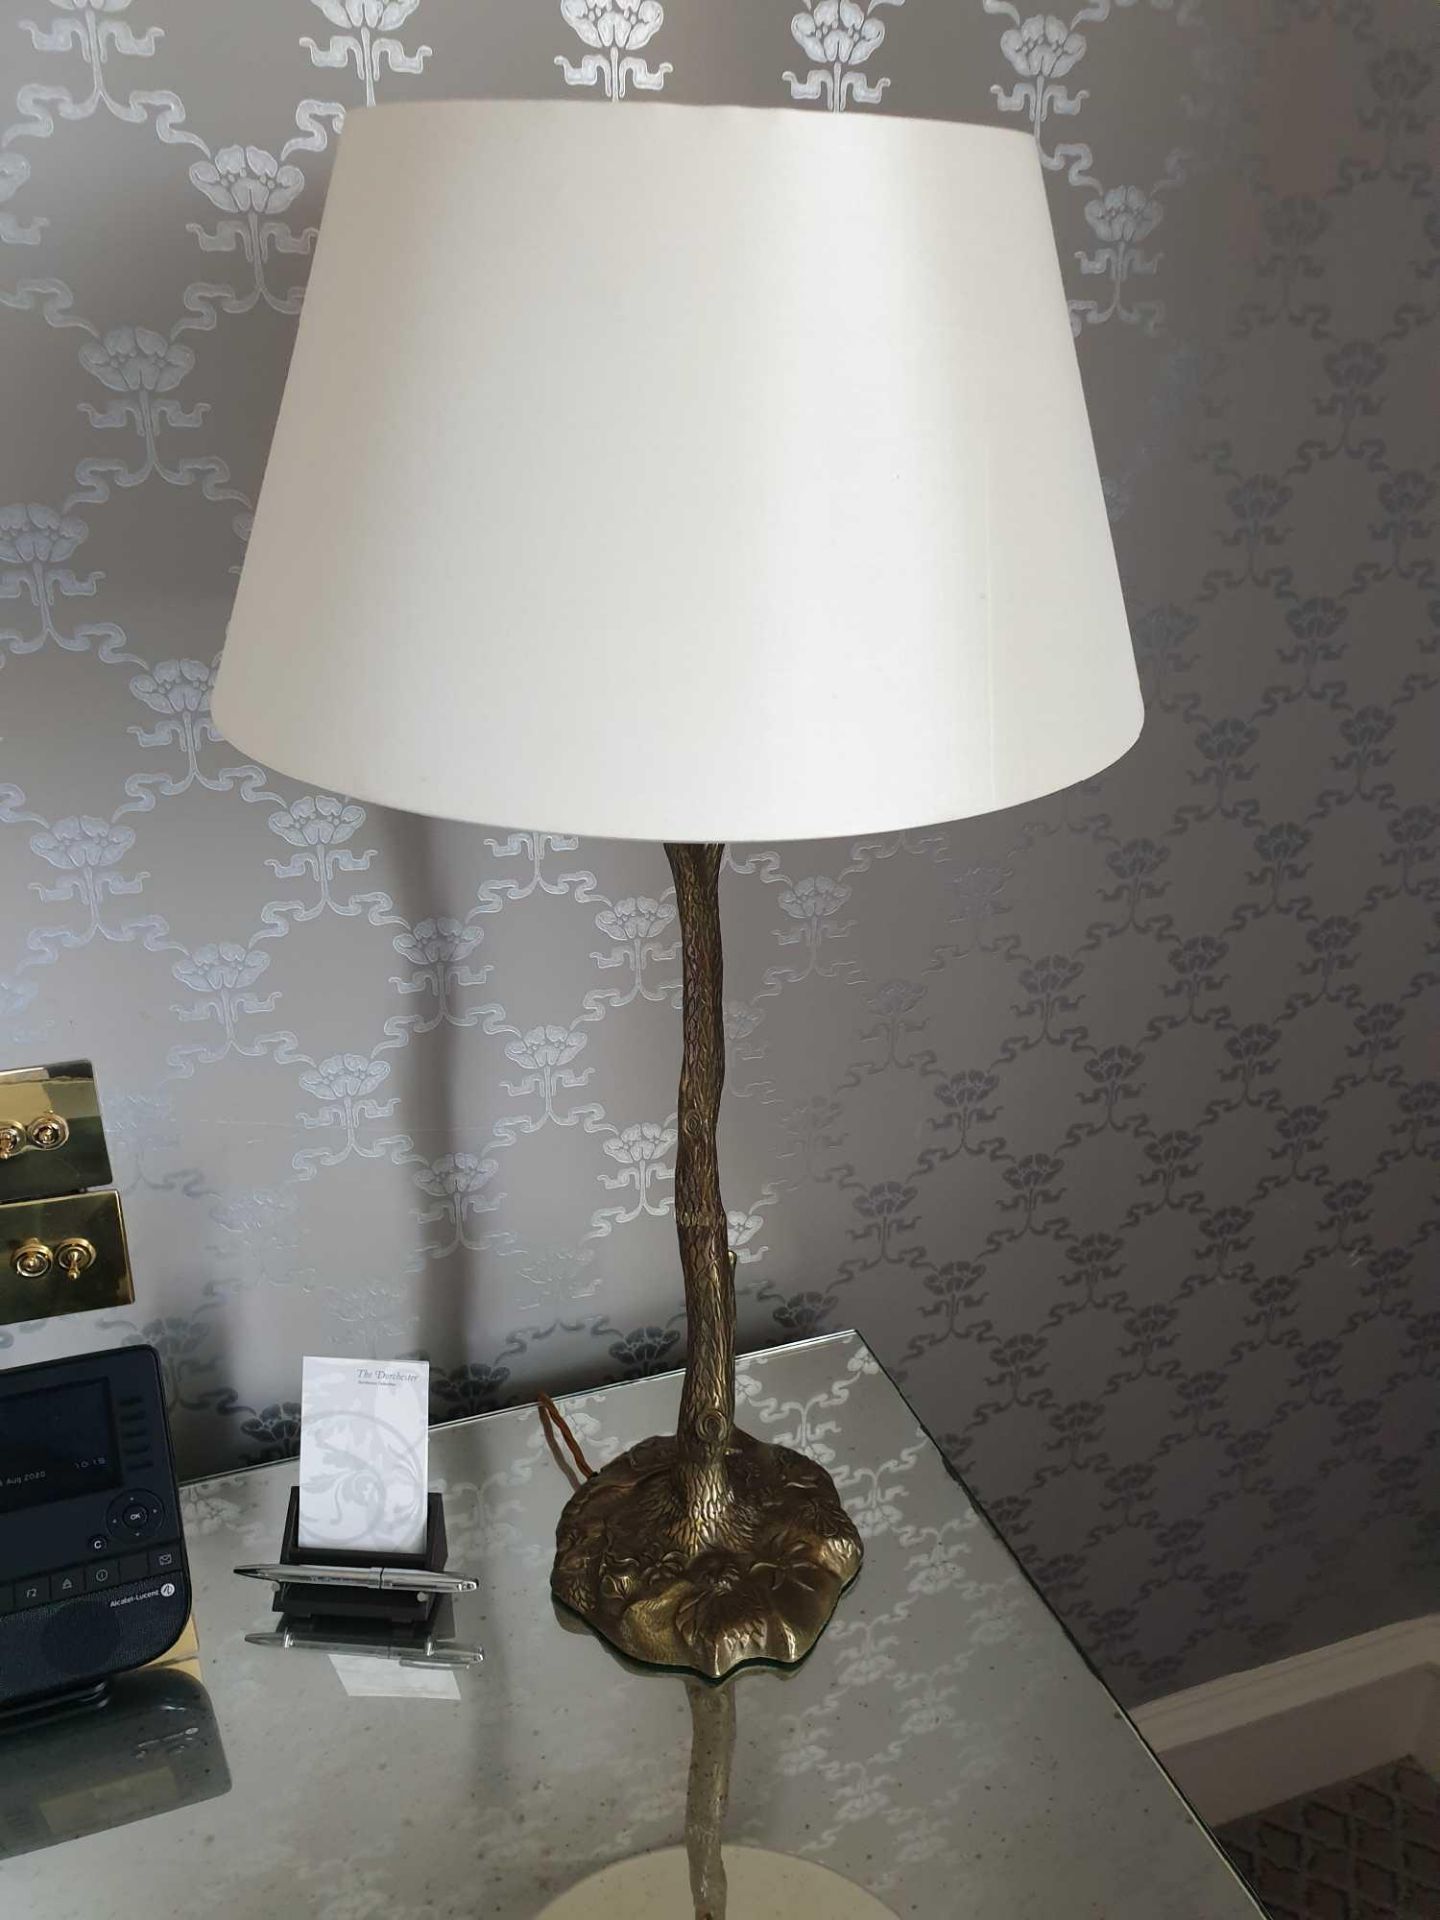 A Pair Of Truro Twig Table Lamp Inspired From A Mid-Century French Design Organic Flowing Stem